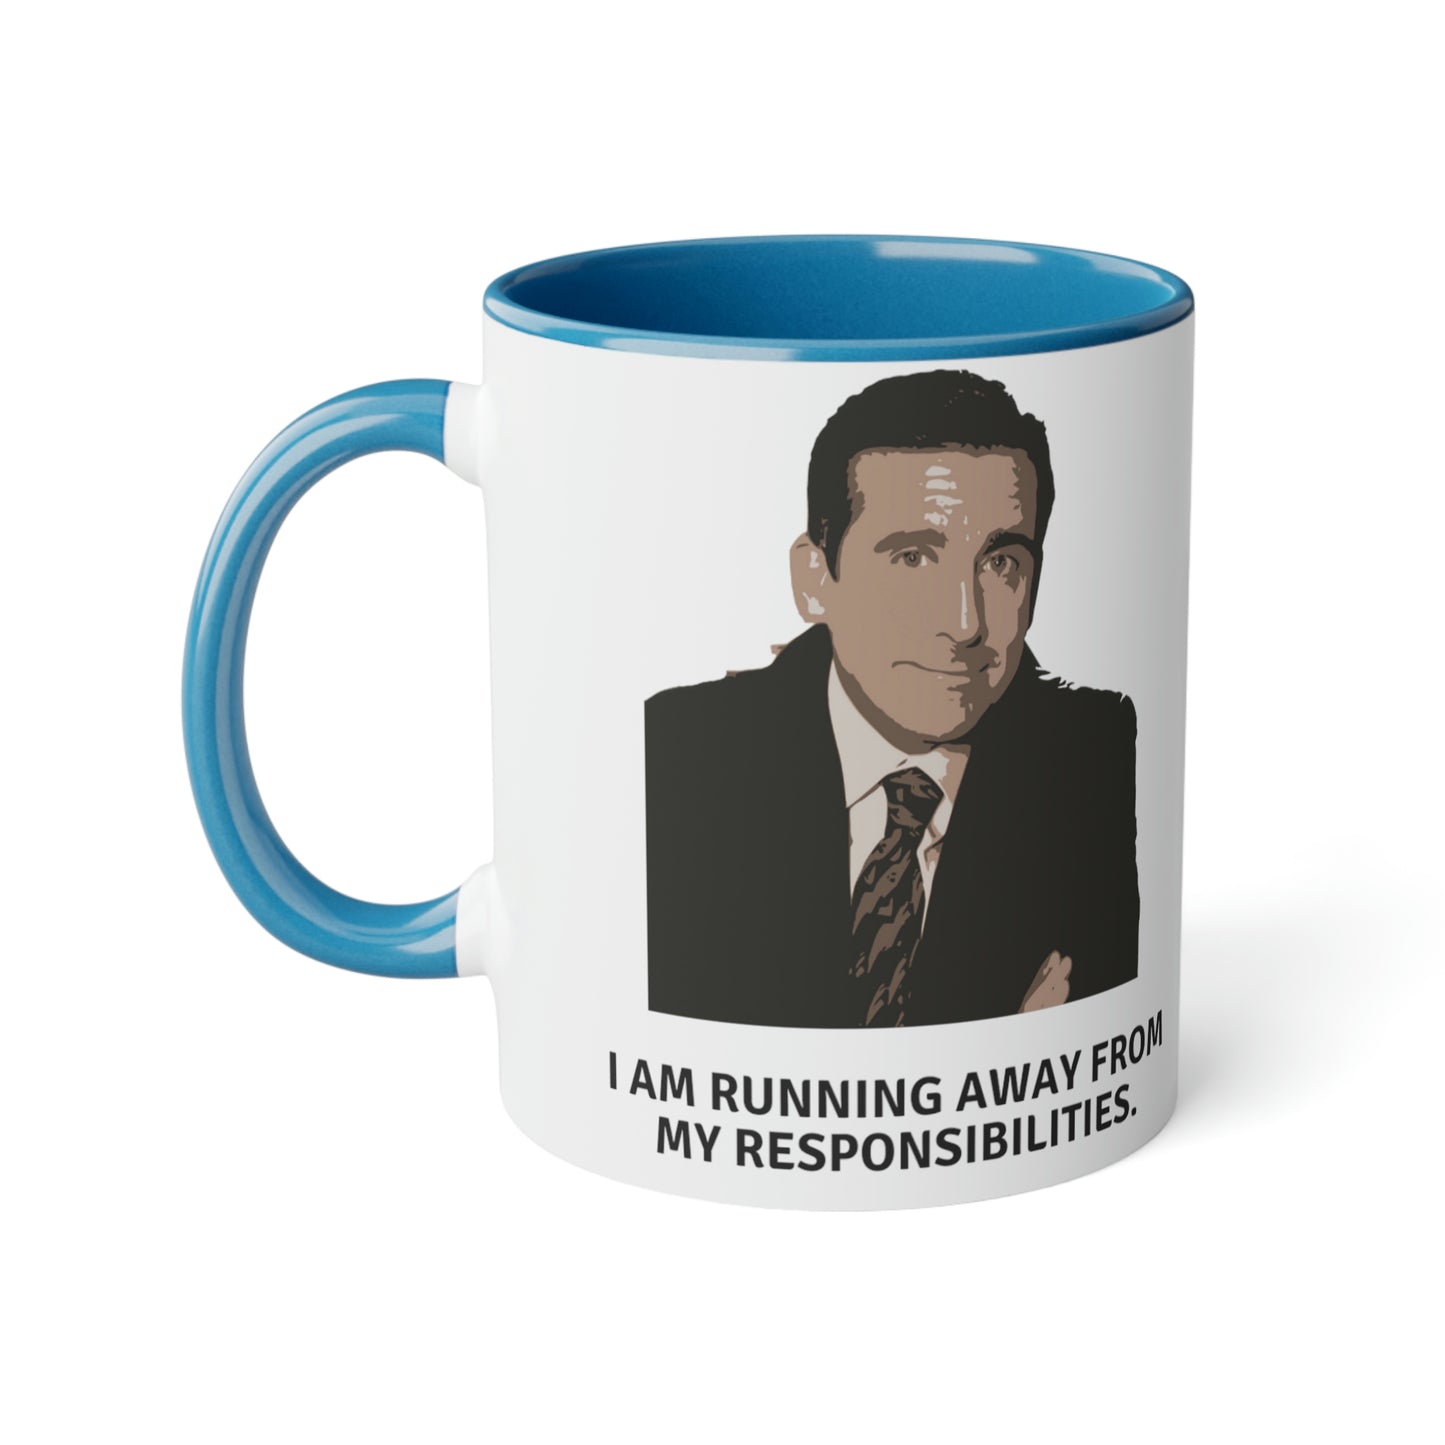 Meme Mug Dunder Mifflin workplace comedy - I am running away from my responsibilities. And it feels good